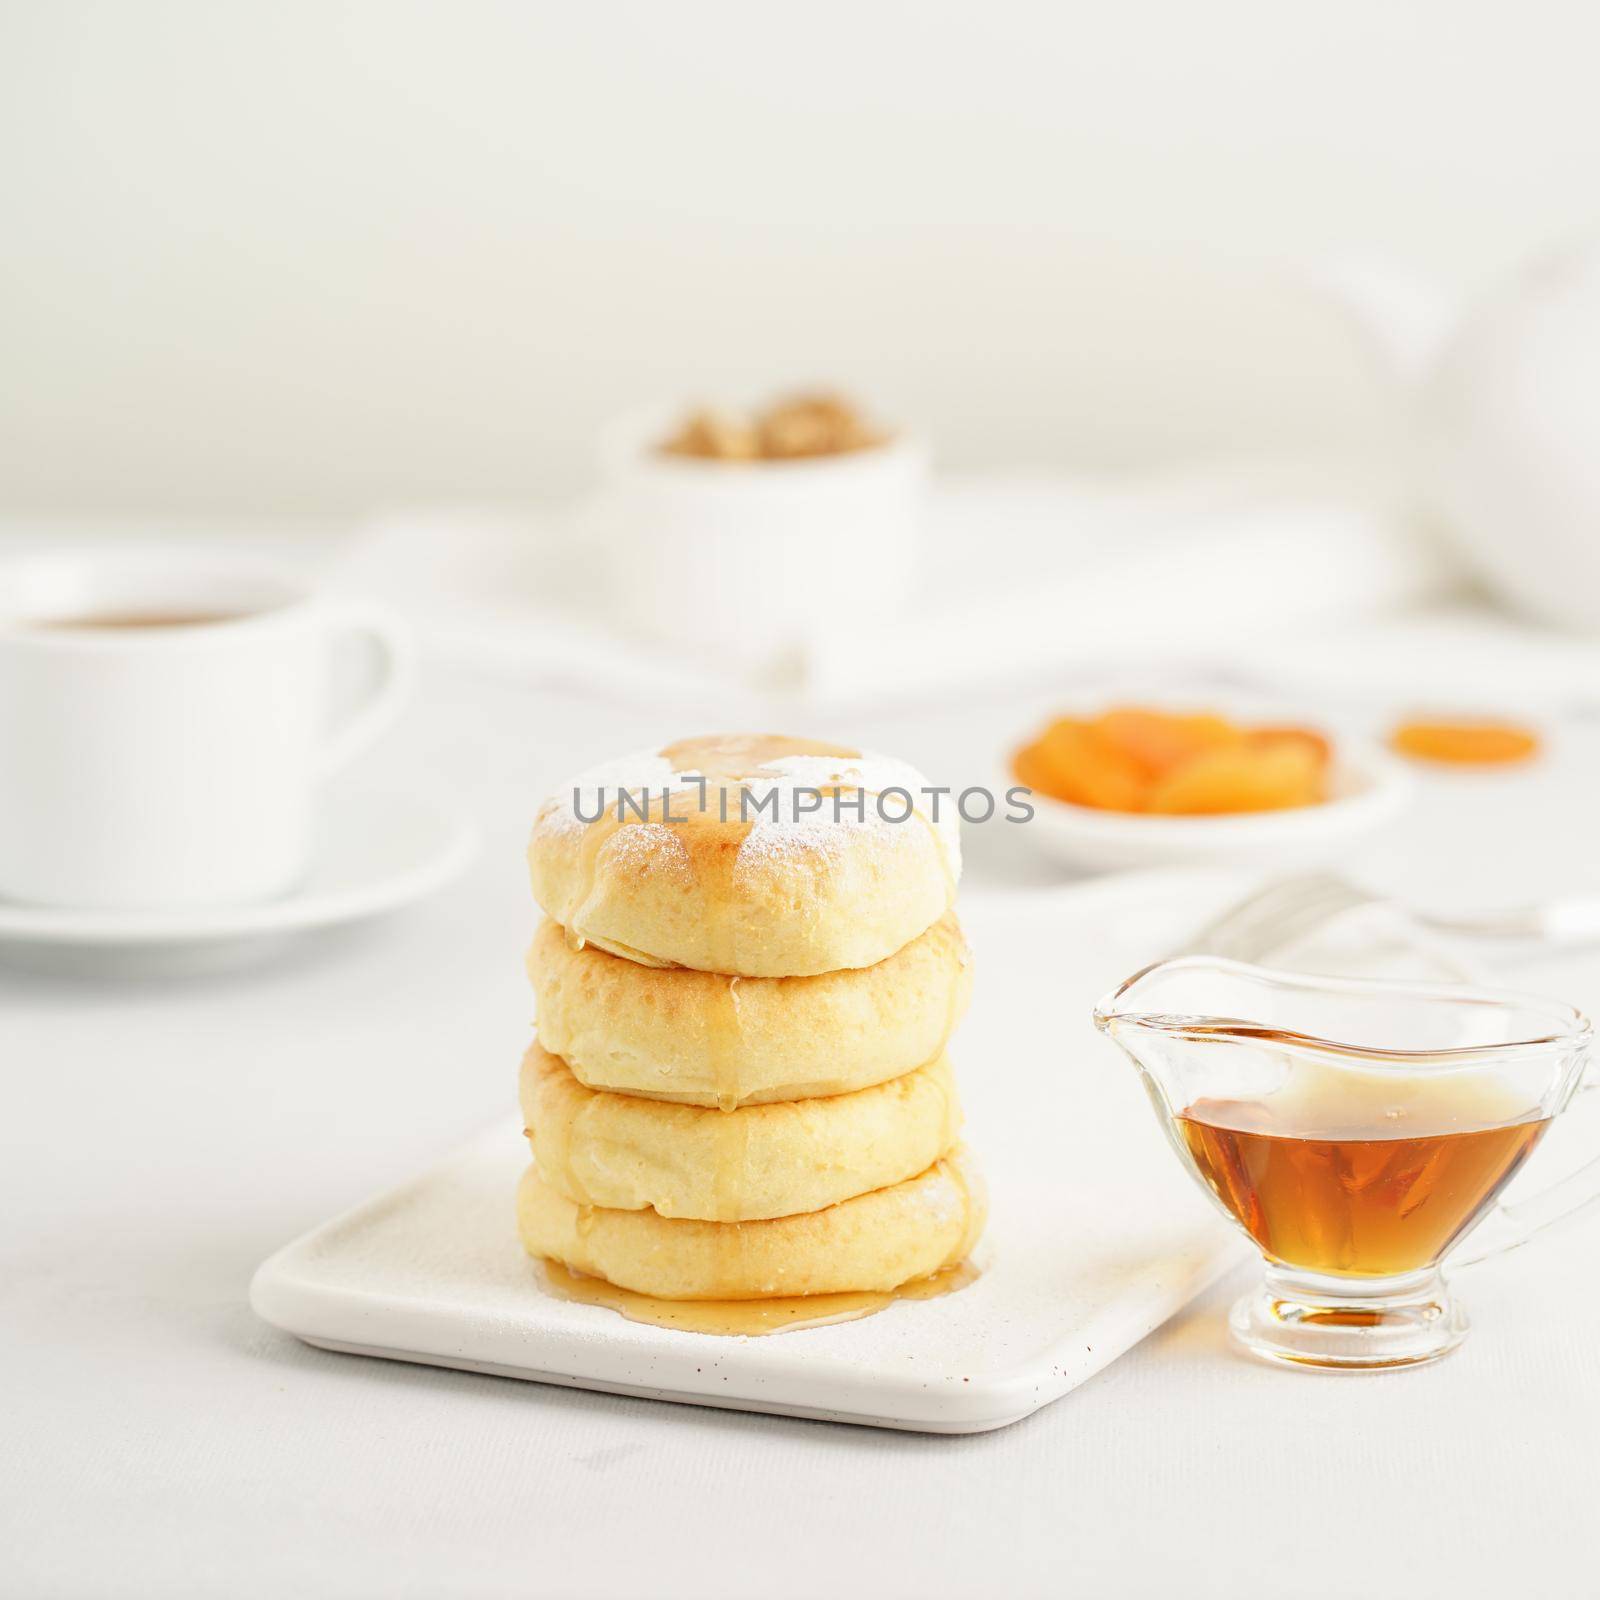 Fried cheese cakes, sweet cheese pancakes on white plate on white background. Home tea party